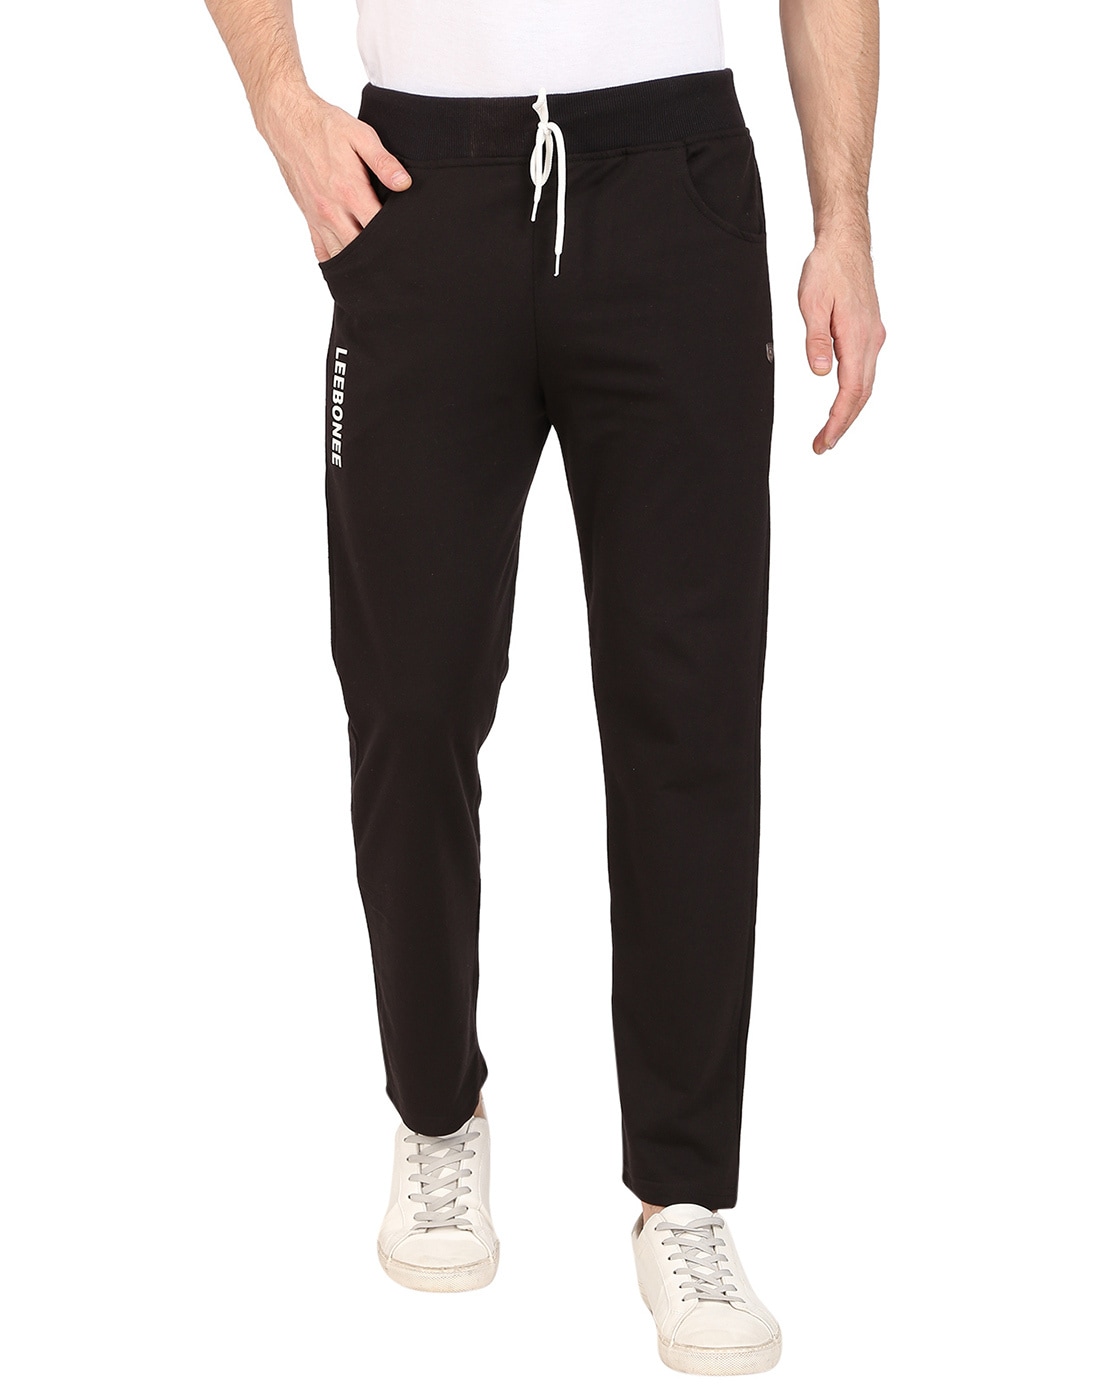 Buy Particle Mens Plus Size Joggers Track Pants Oversized Loose Dark  Charcoal Grey Size XL A3TRA2BCBXL at Amazonin